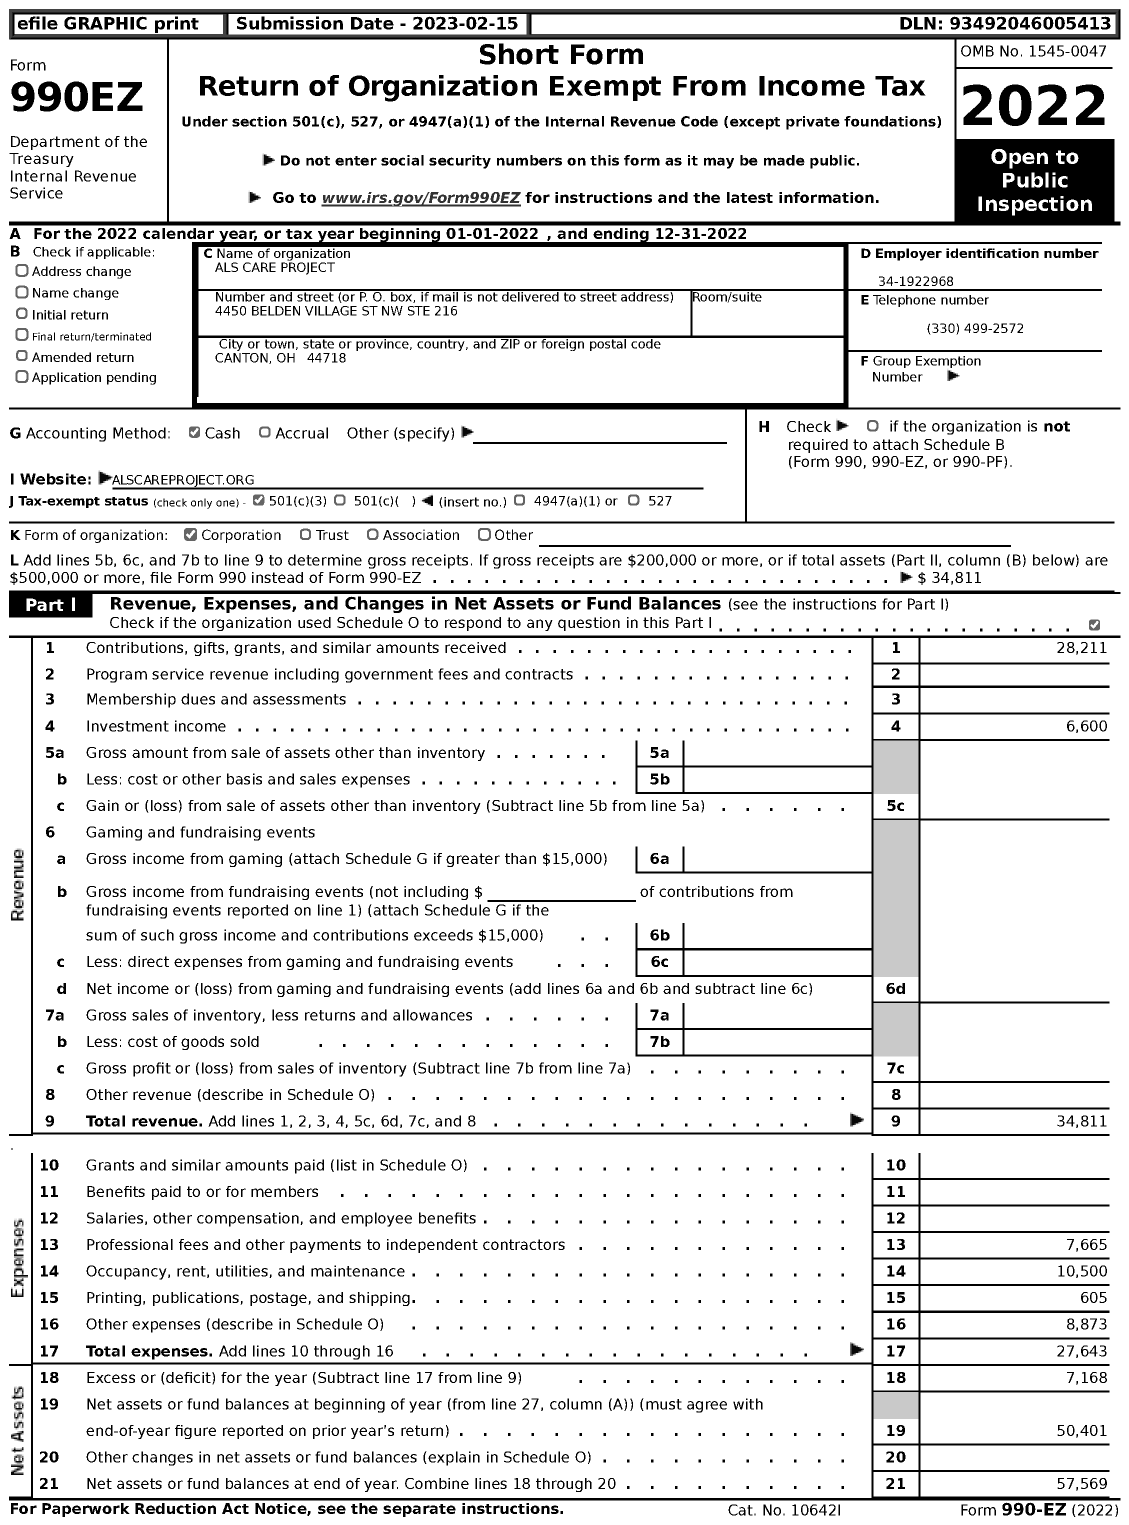 Image of first page of 2022 Form 990EZ for Als Care Project